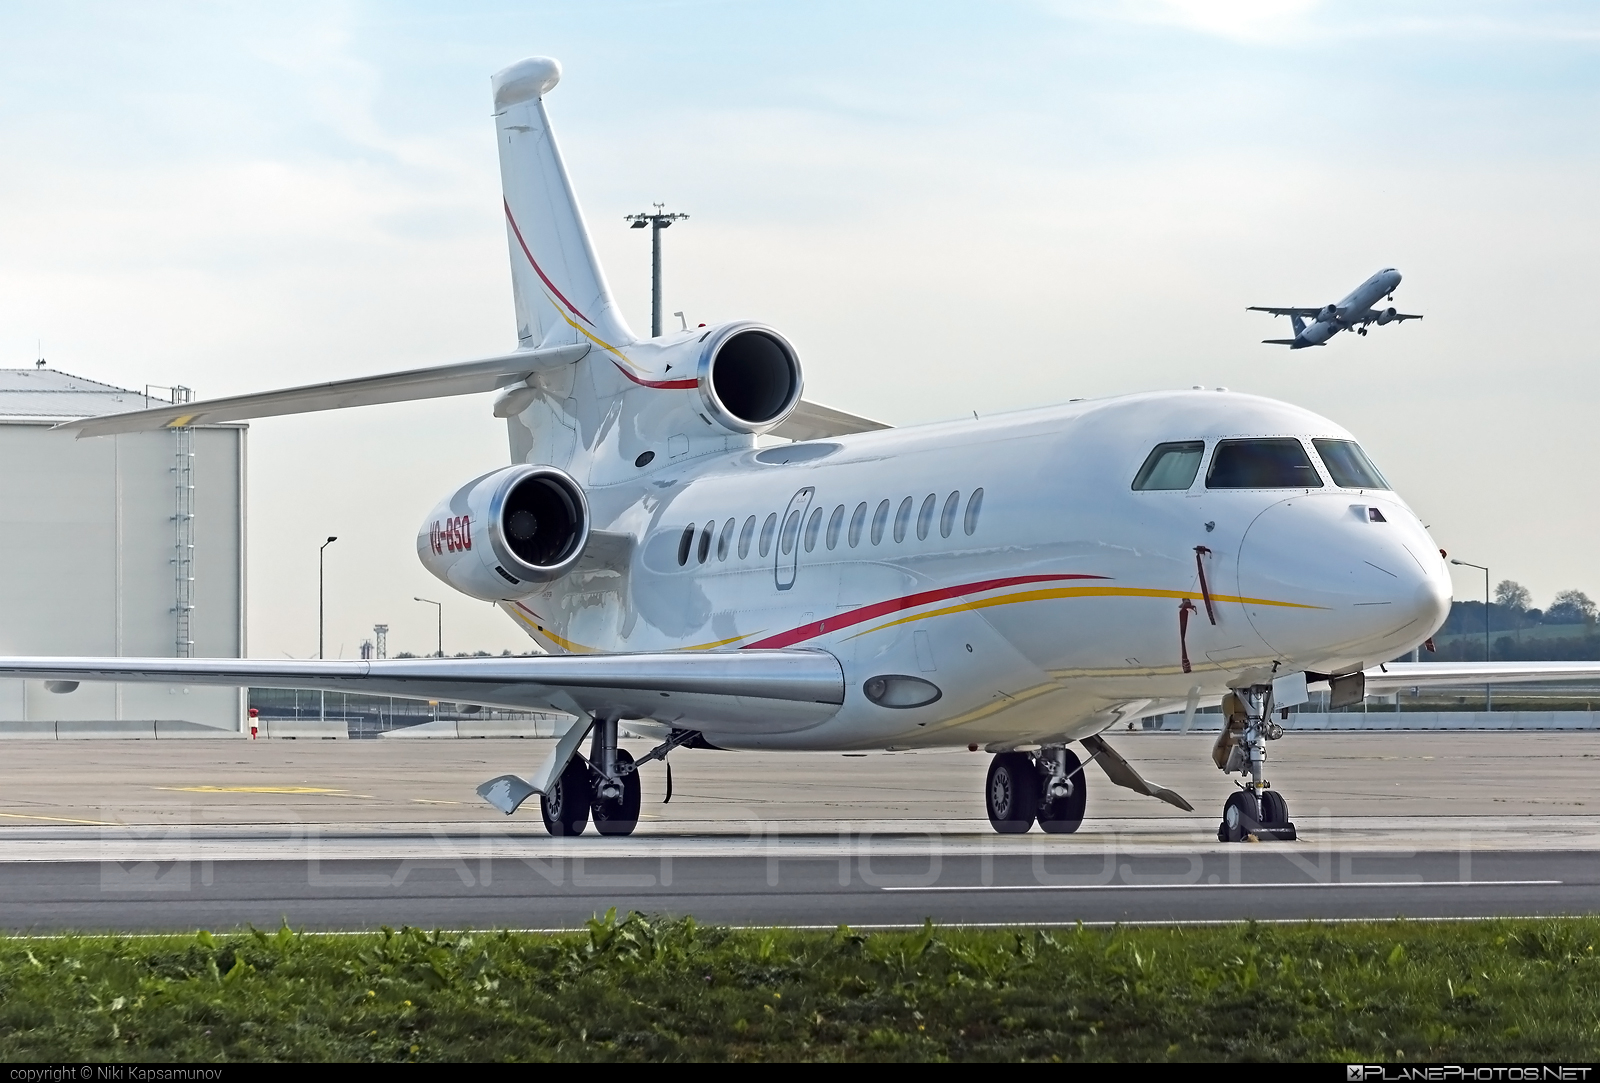 Dassault Falcon 7X - VQ-BSO operated by Shell Aircraft Ltd #dassault #dassaultfalcon #dassaultfalcon7x #falcon7x #shellaircraft #shellaircraftltd